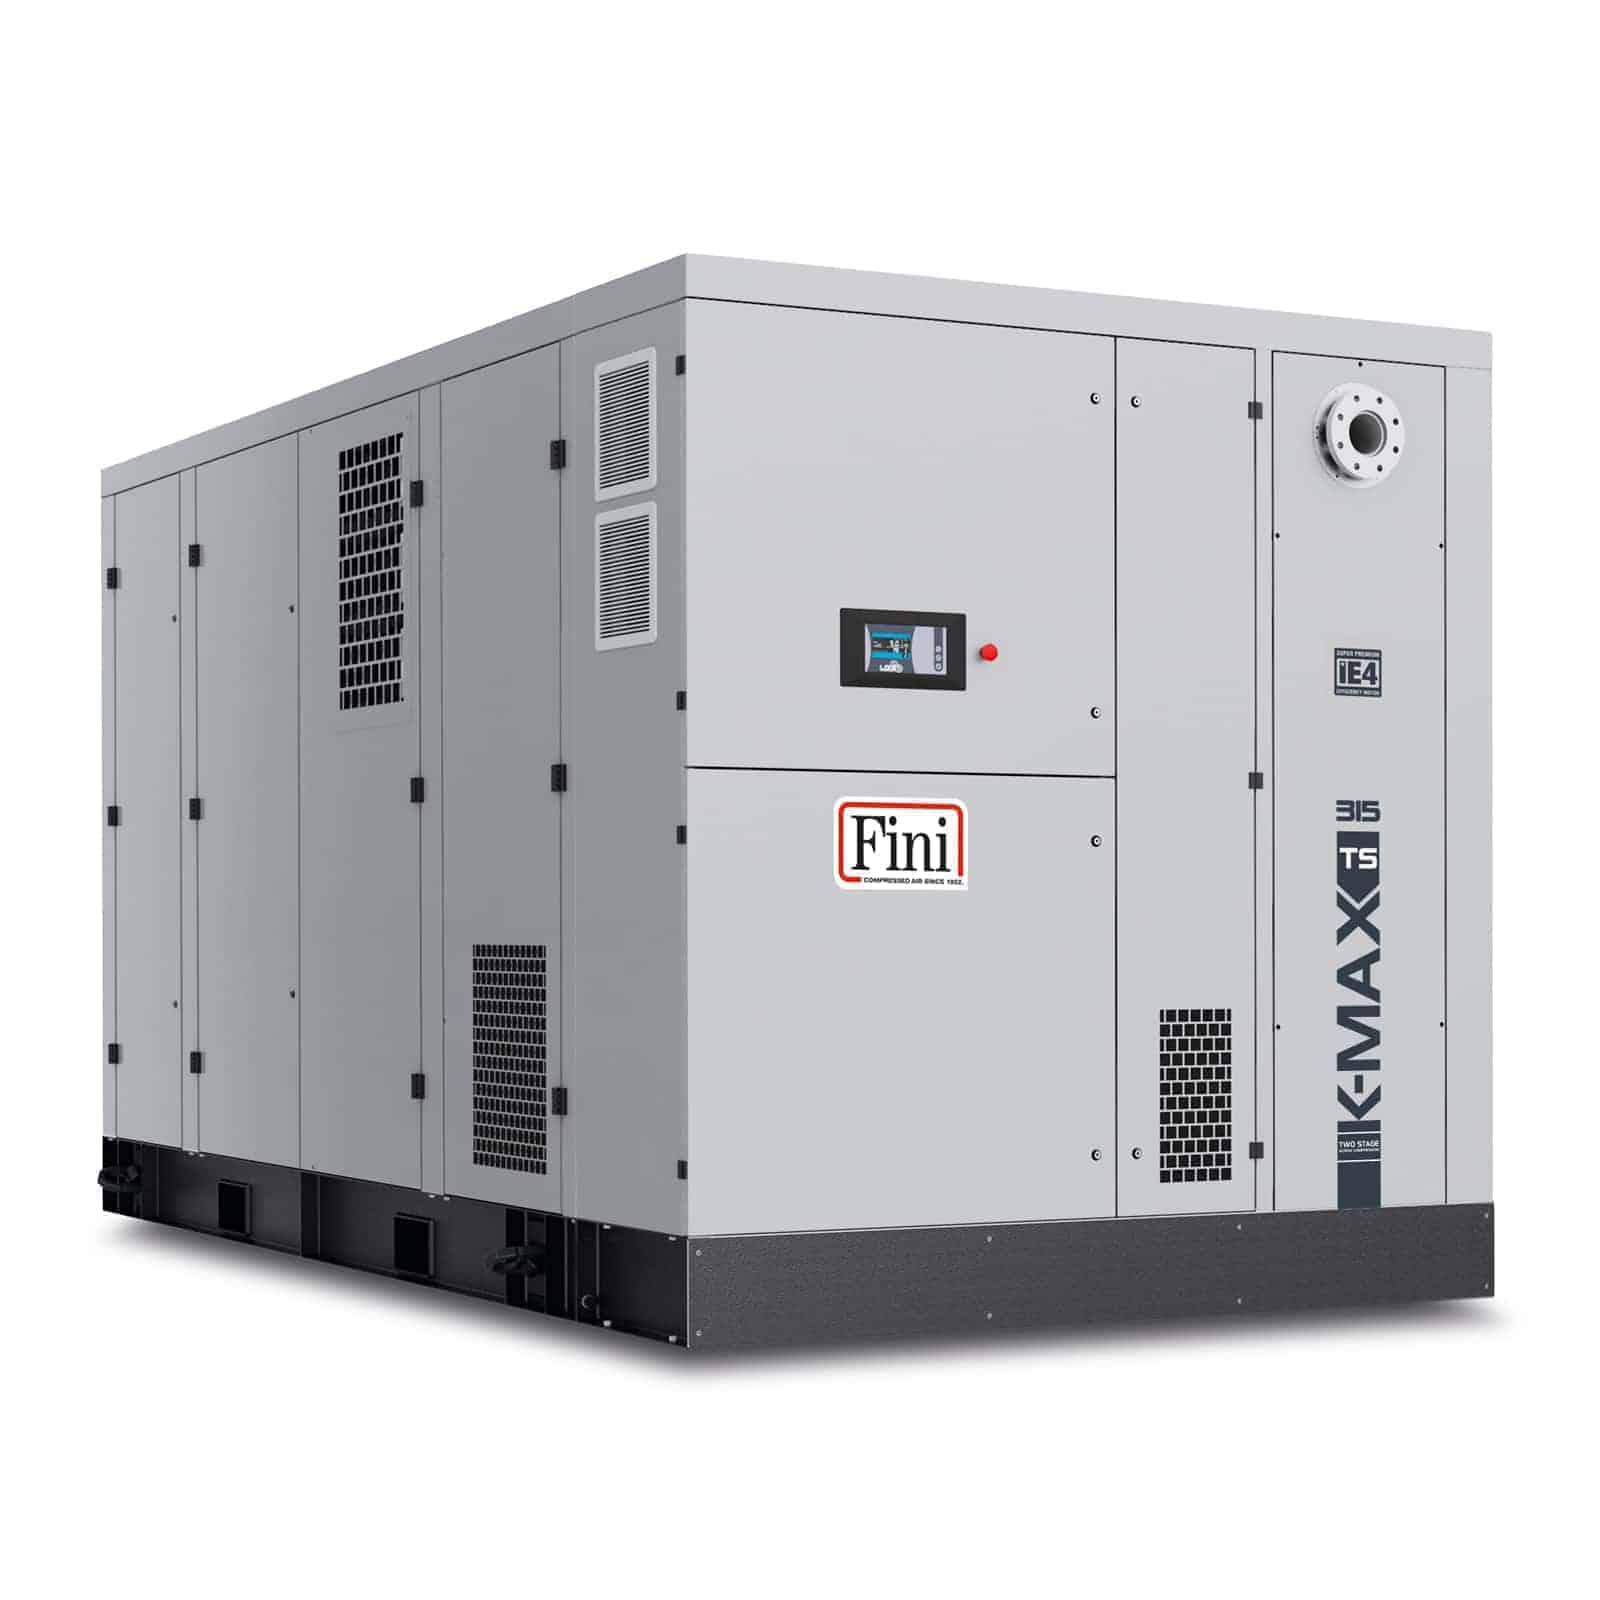 K-MAX TS 315-07 VS Highly efficient, two-stage screw compressor, with direct drive transmission and inverter.